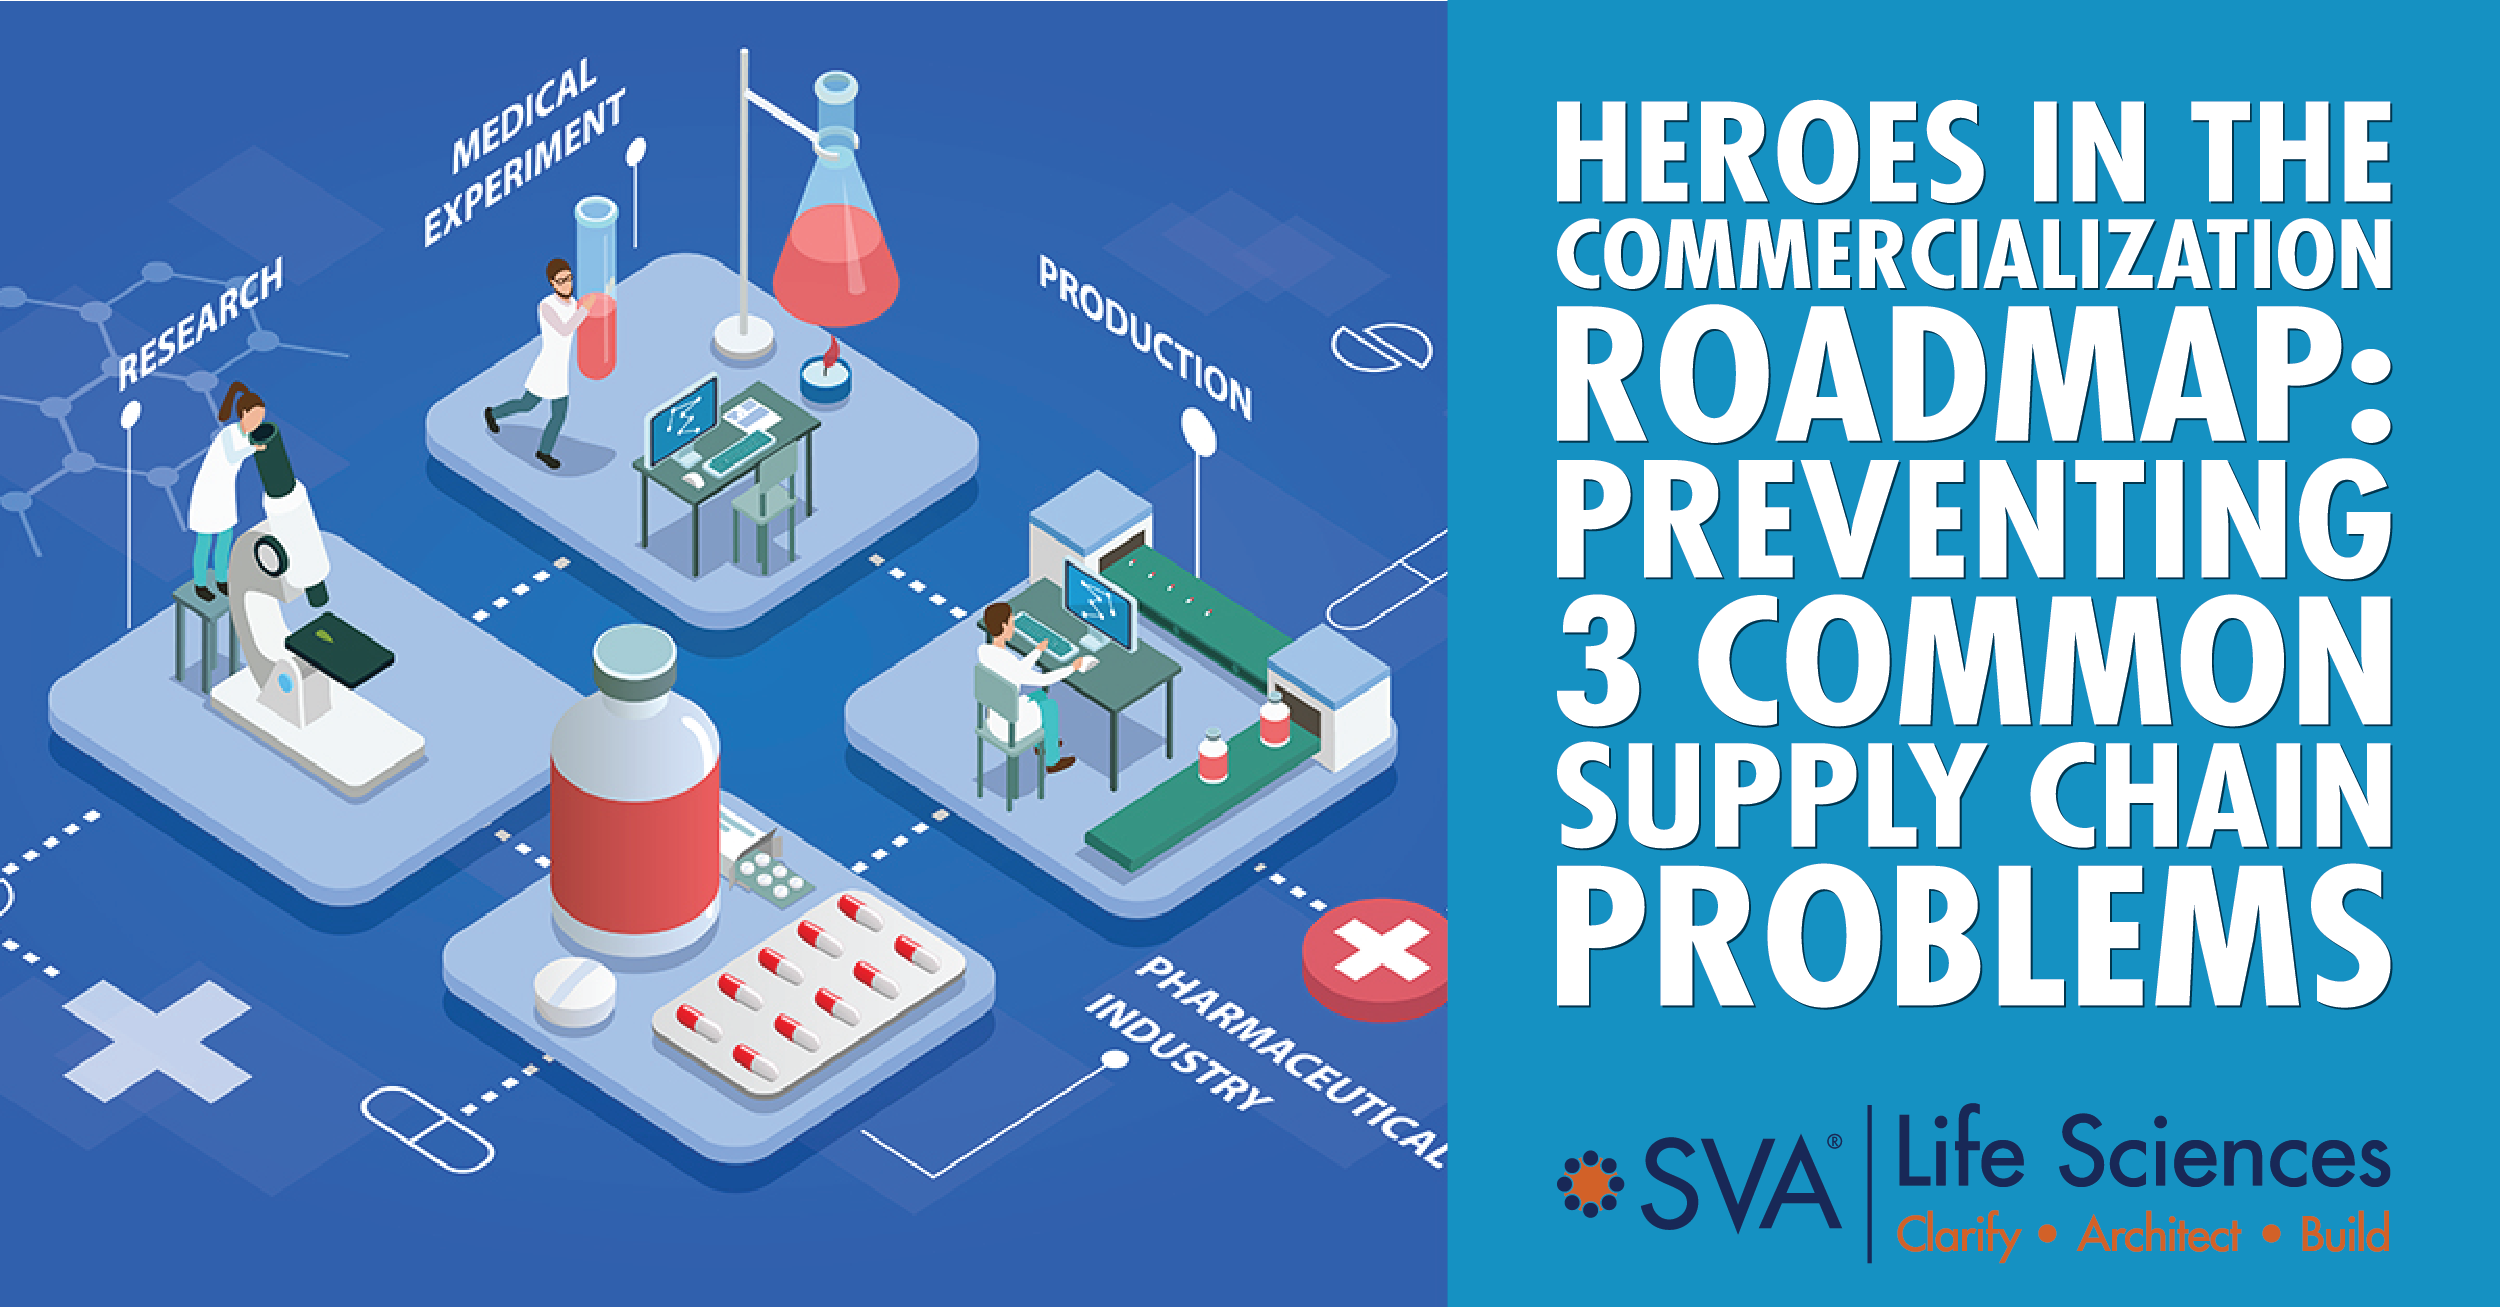 Heroes in the Commercialization Journey: Preventing 3 Common Supply Chain Problems